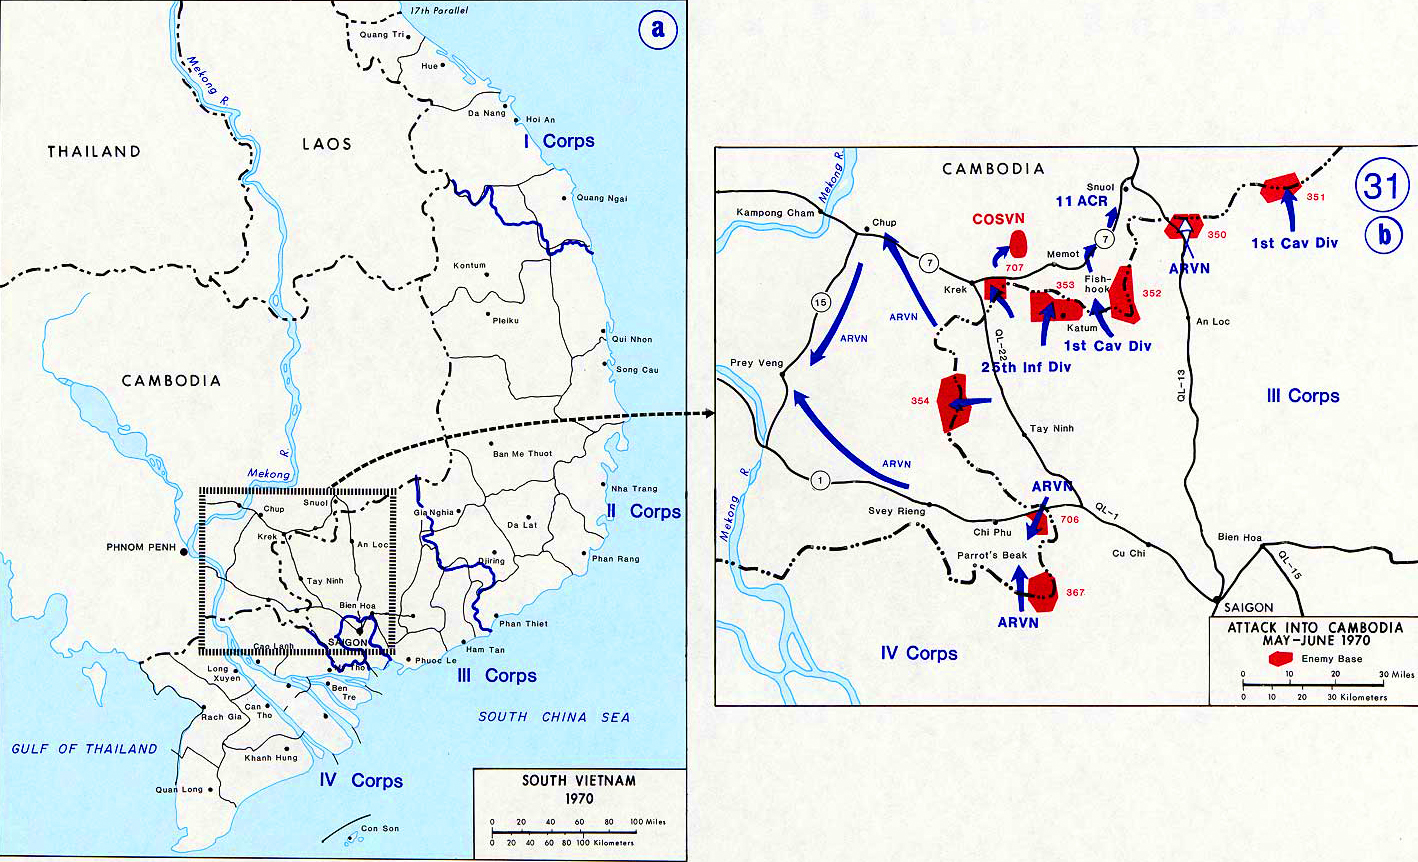 History Map of the Vietnam War. South Vietnam, Attack into Cambodia, May - June 1970.